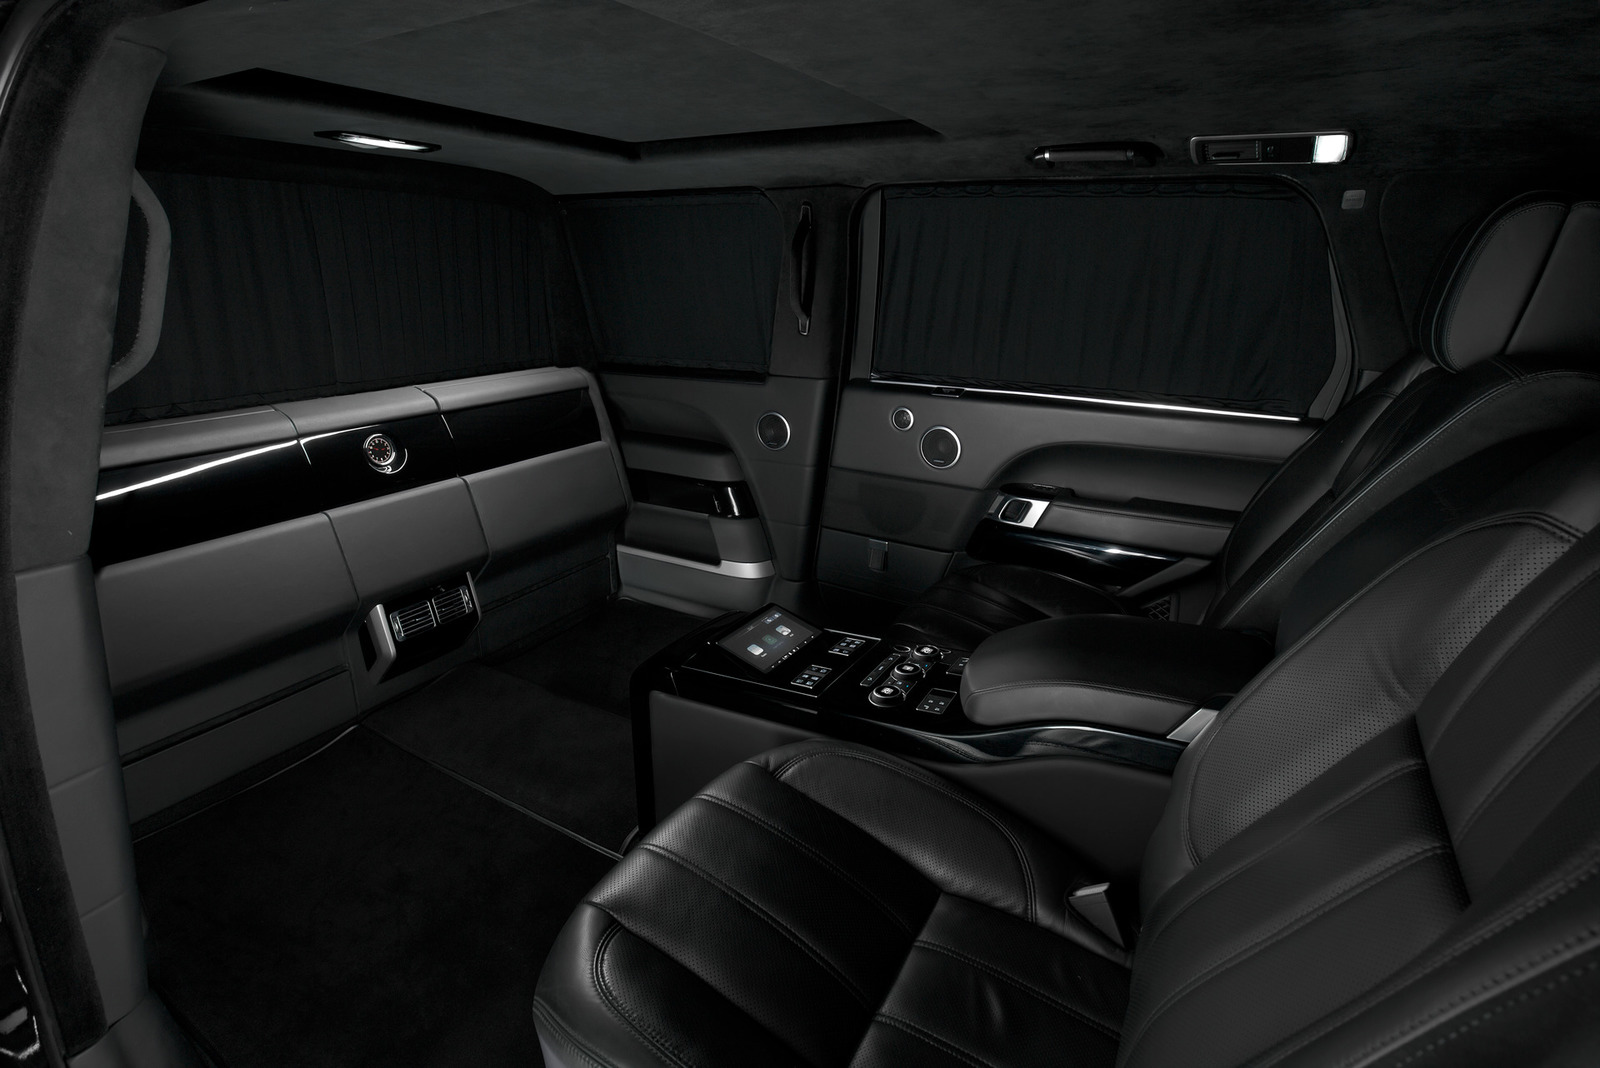 This Stretched Luxury Klassen Range Rover Limo Is Armoured And Made For  Kings And The Wealthy - KLASSEN